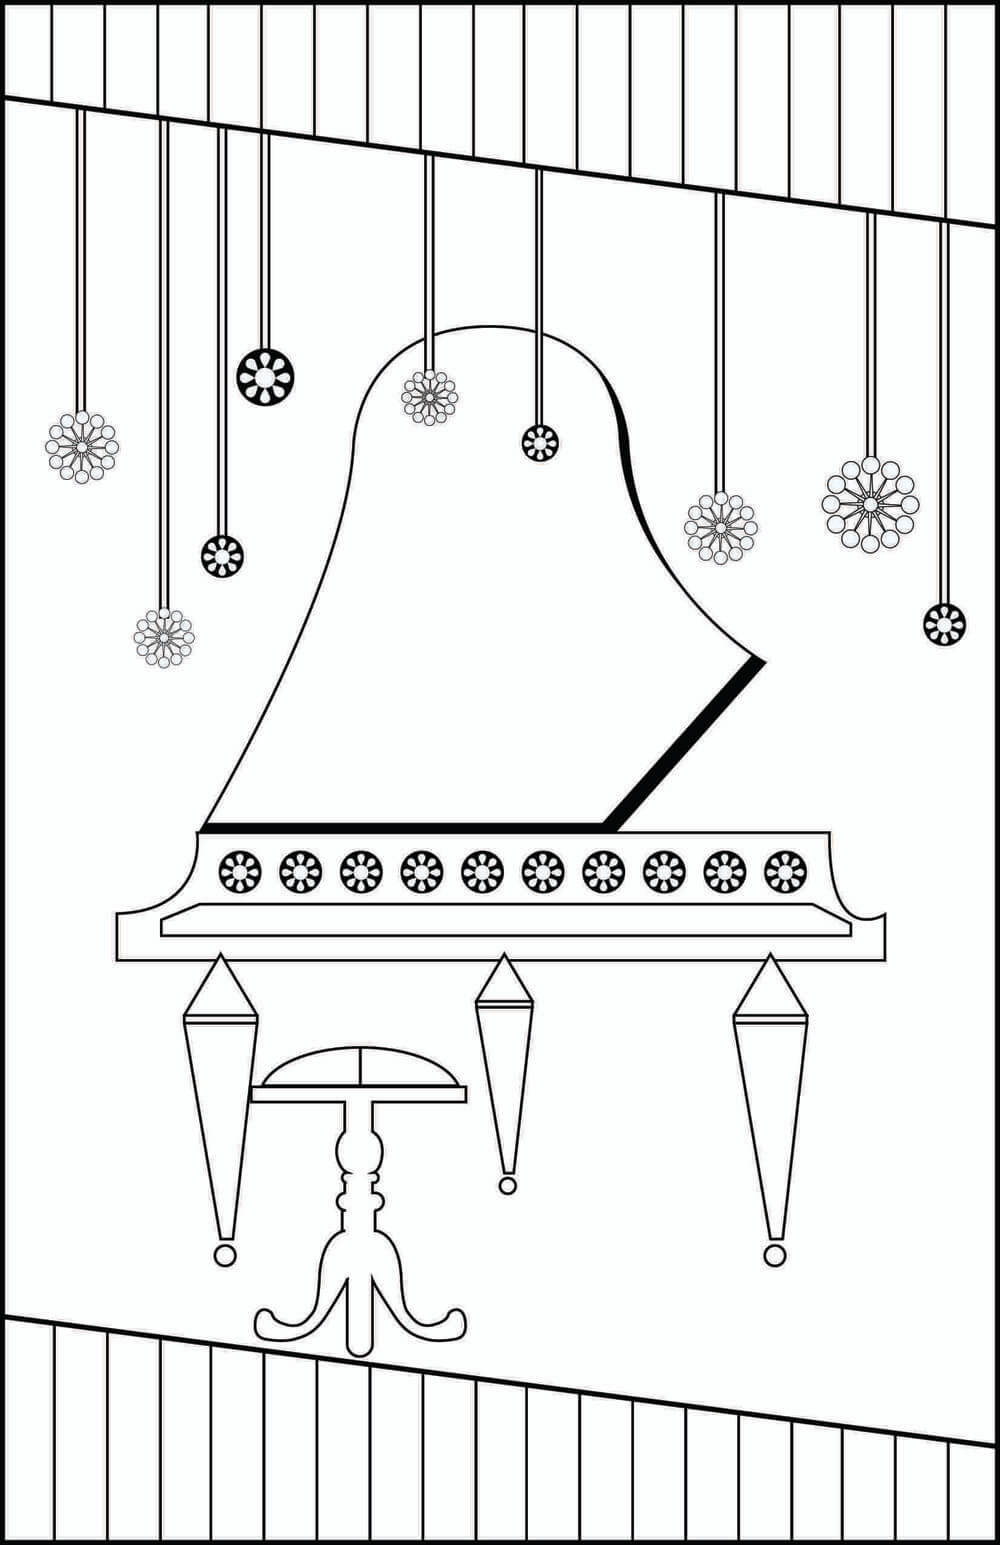 Piano Incroyable coloring page